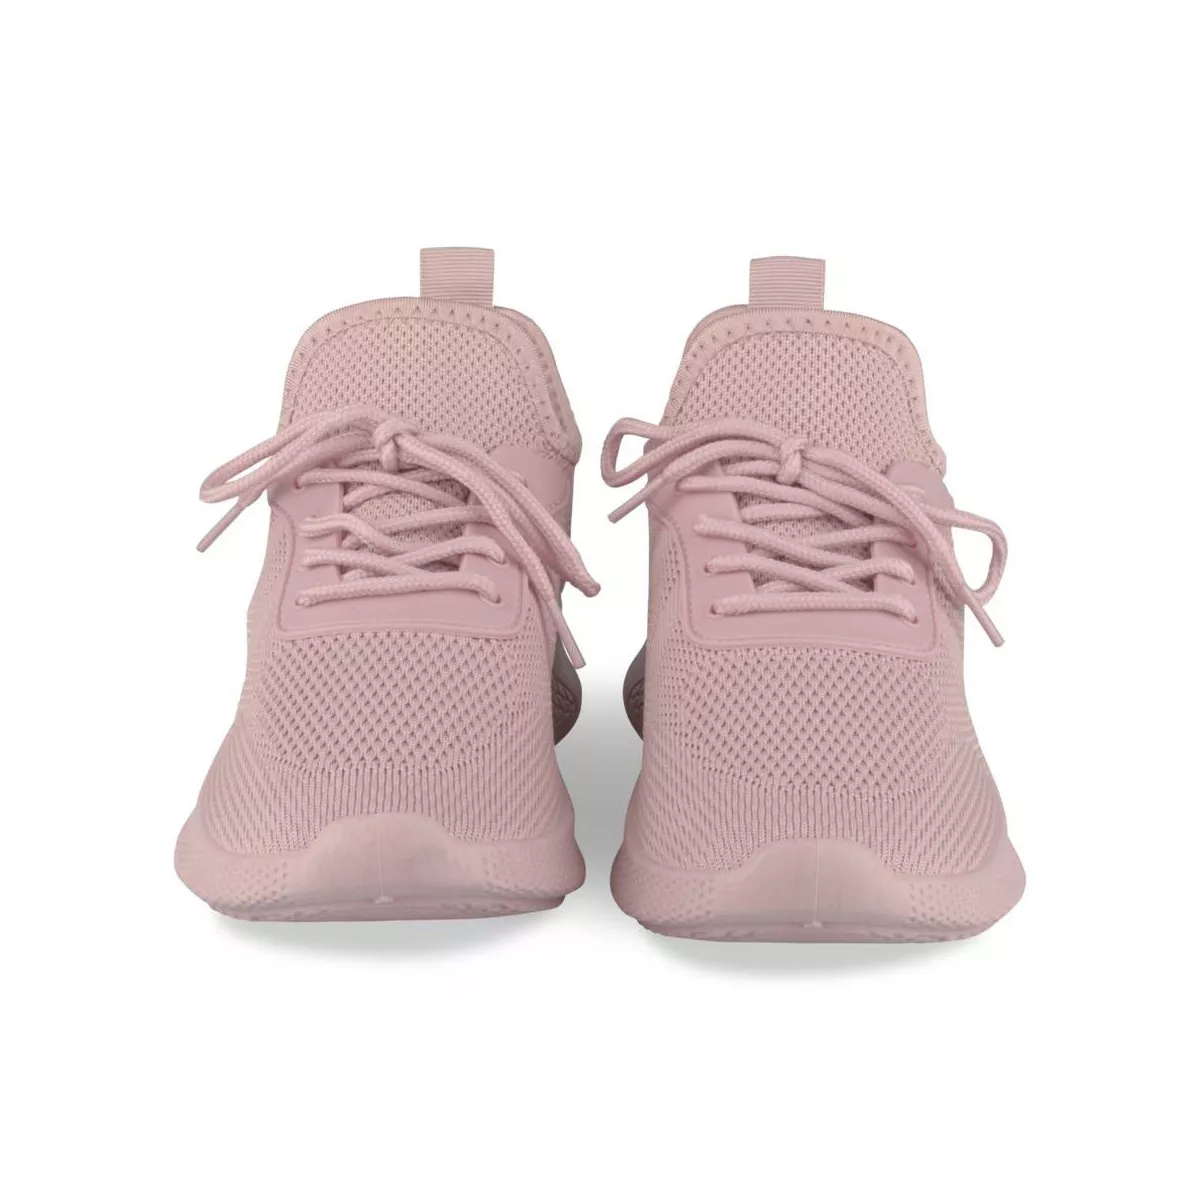 Adidas Shoes Womens 7.5 Ultra Boost 4.0 Ash Pearl BB6497 Sneakers Light Pink  | eBay